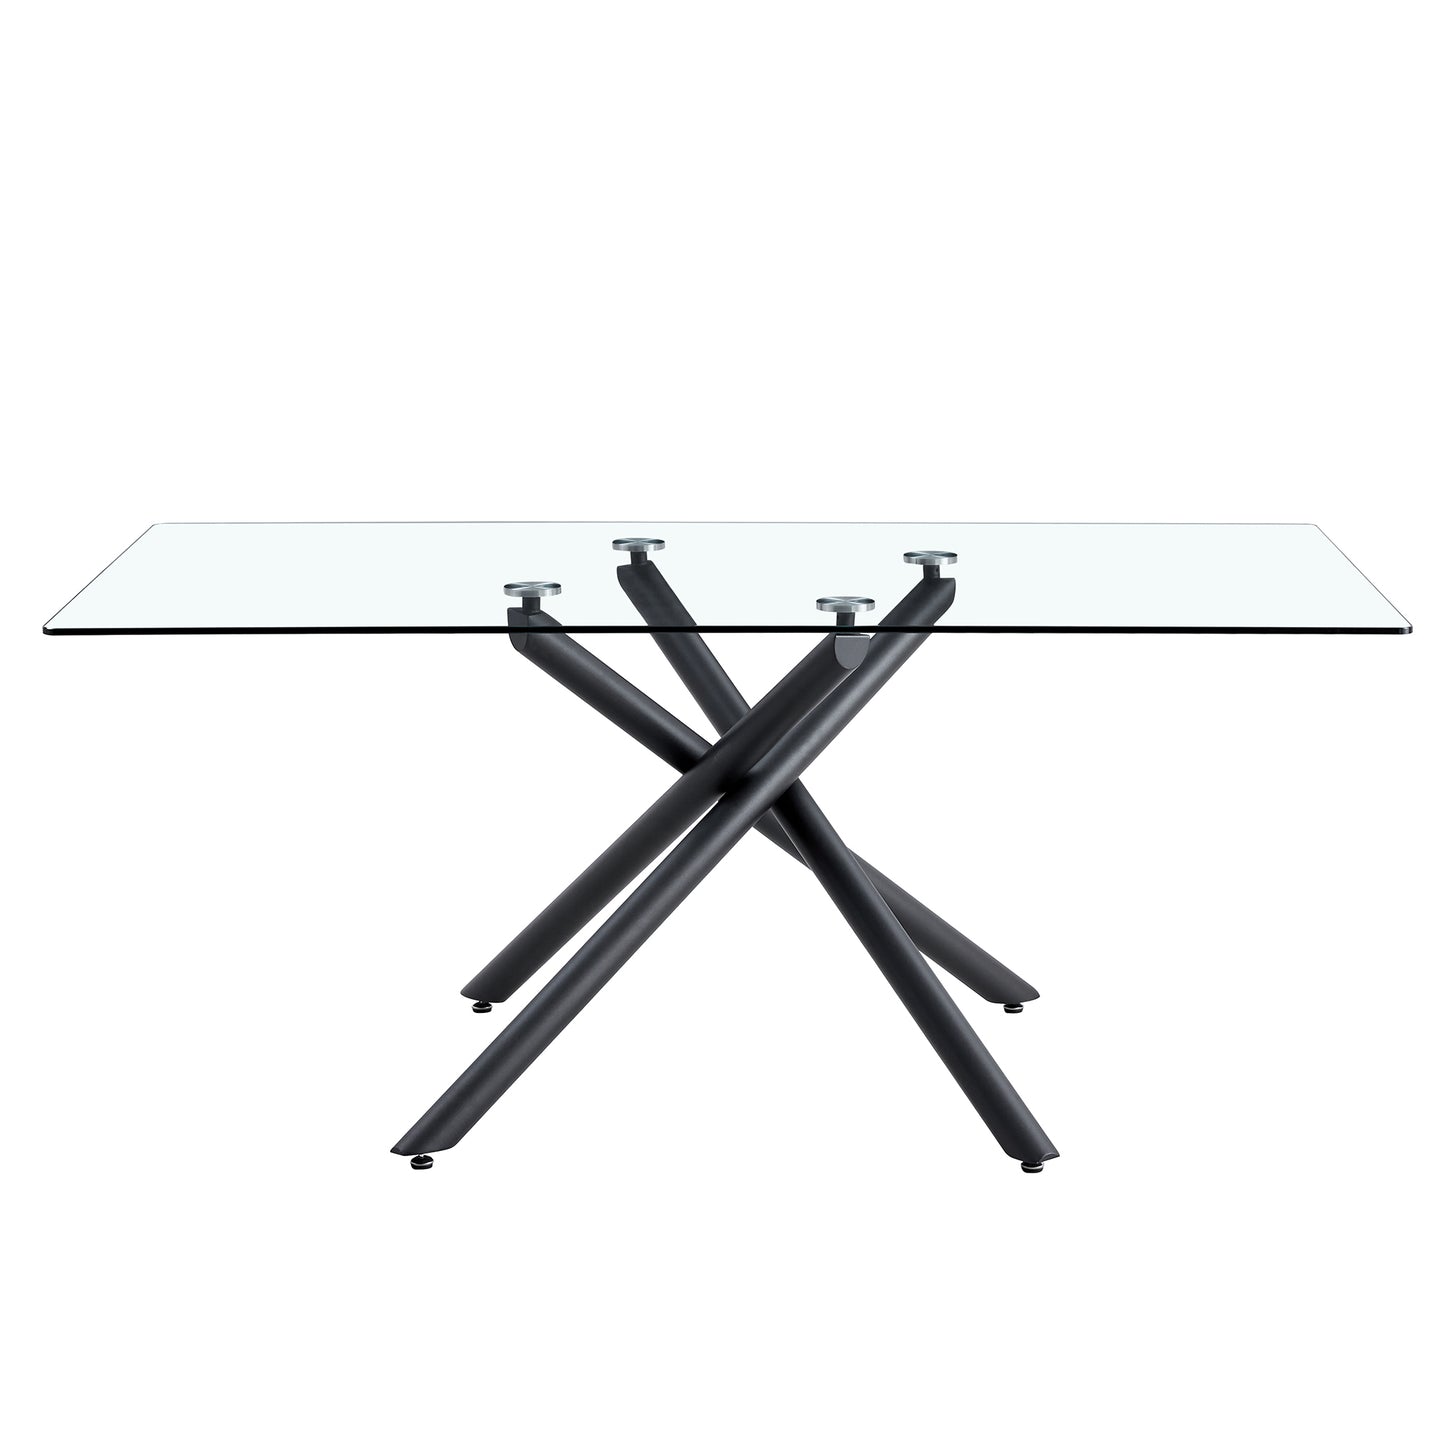 Large Modern Minimalist Rectangular Glass Dining Table for 6-8 with 0.39" Tempered Glass Tabletop and Black color Metal Legs, for Kitchen Dining Living Meeting Room Banquet hall,71" W x 39" D x 301537